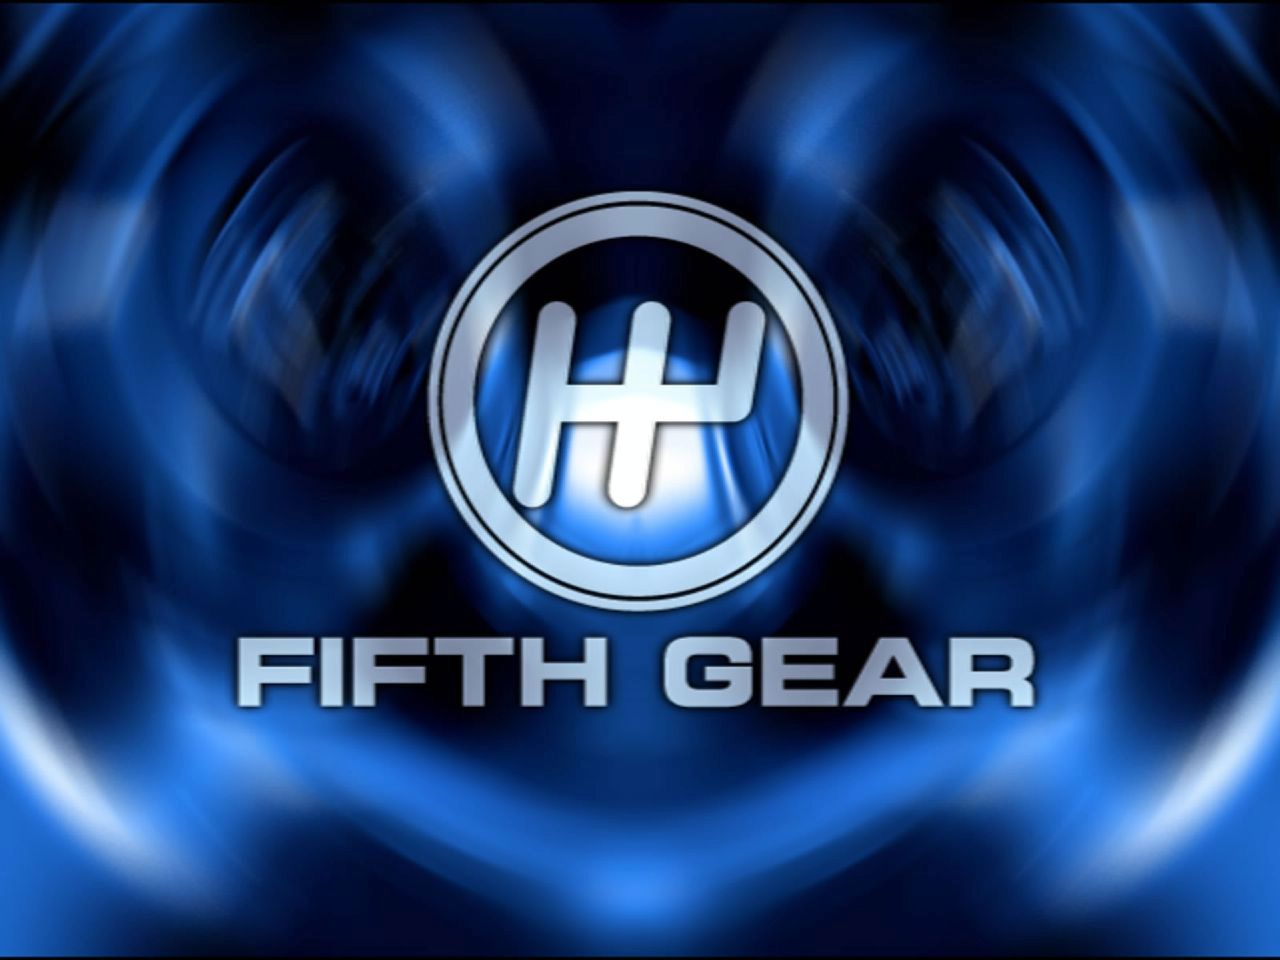 There were actually two Top Gears- the original renamed Fifth Gear, and the new format Top Gear in BBC featuring Jeremy Clarkson, Richard Hammond and James May.